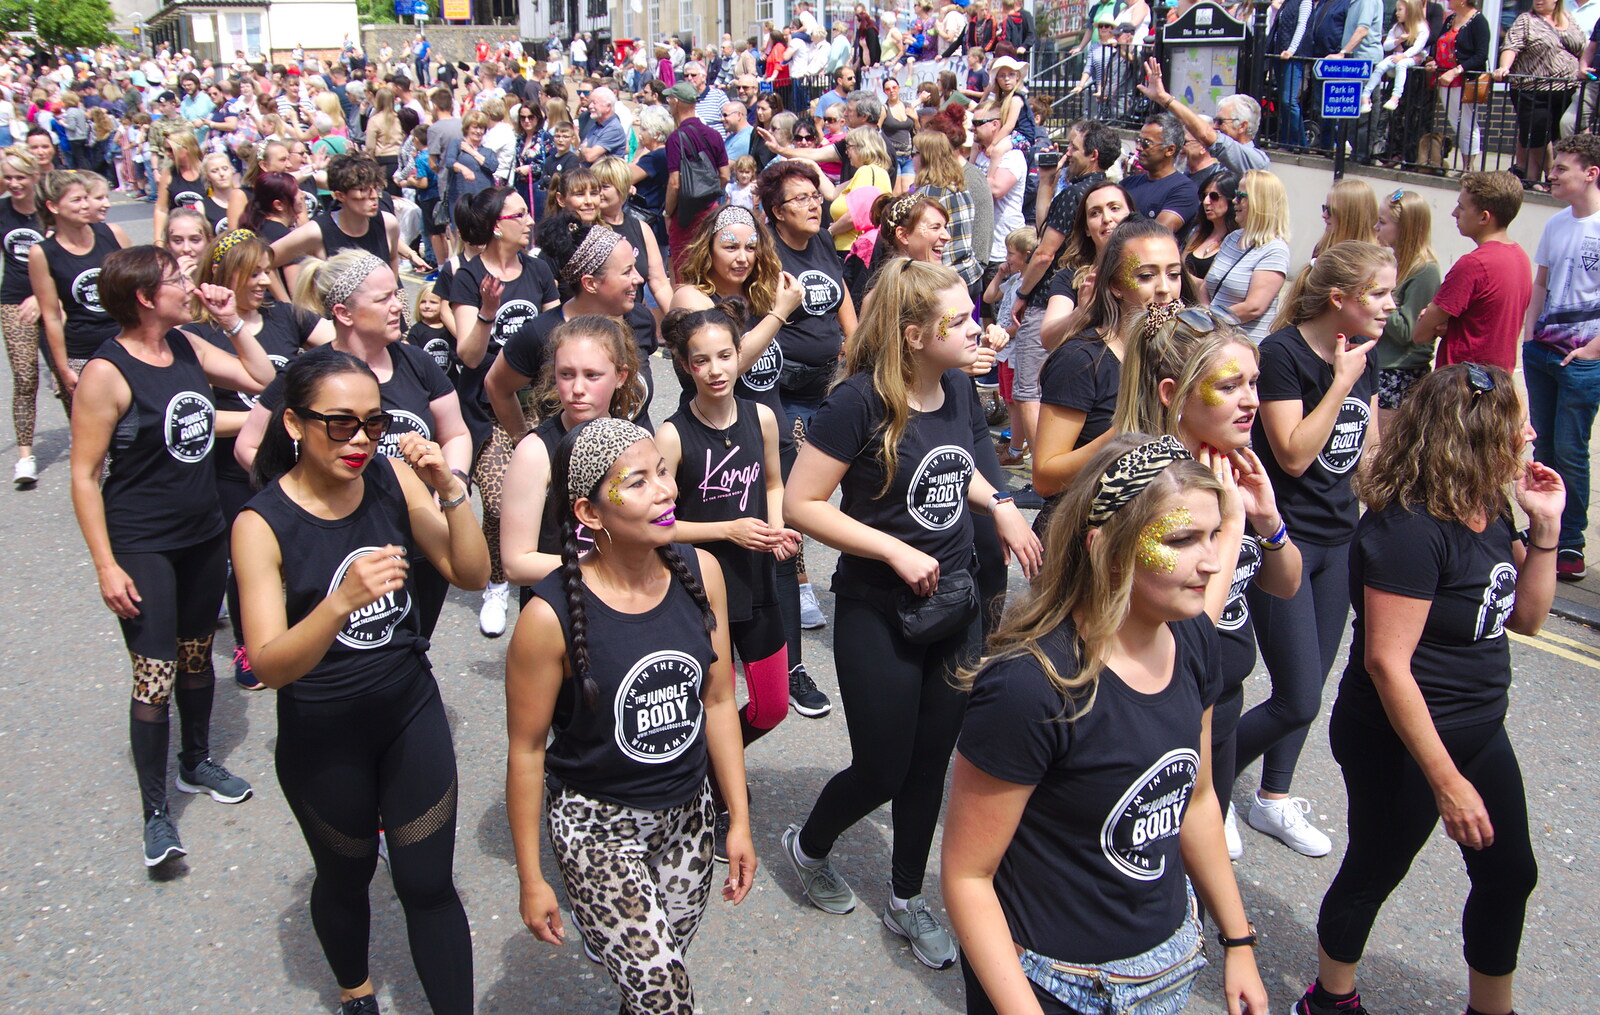 The Jungle Body dance/fitness group from The Diss Carnival 2019, Diss, Norfolk - 9th June 2019